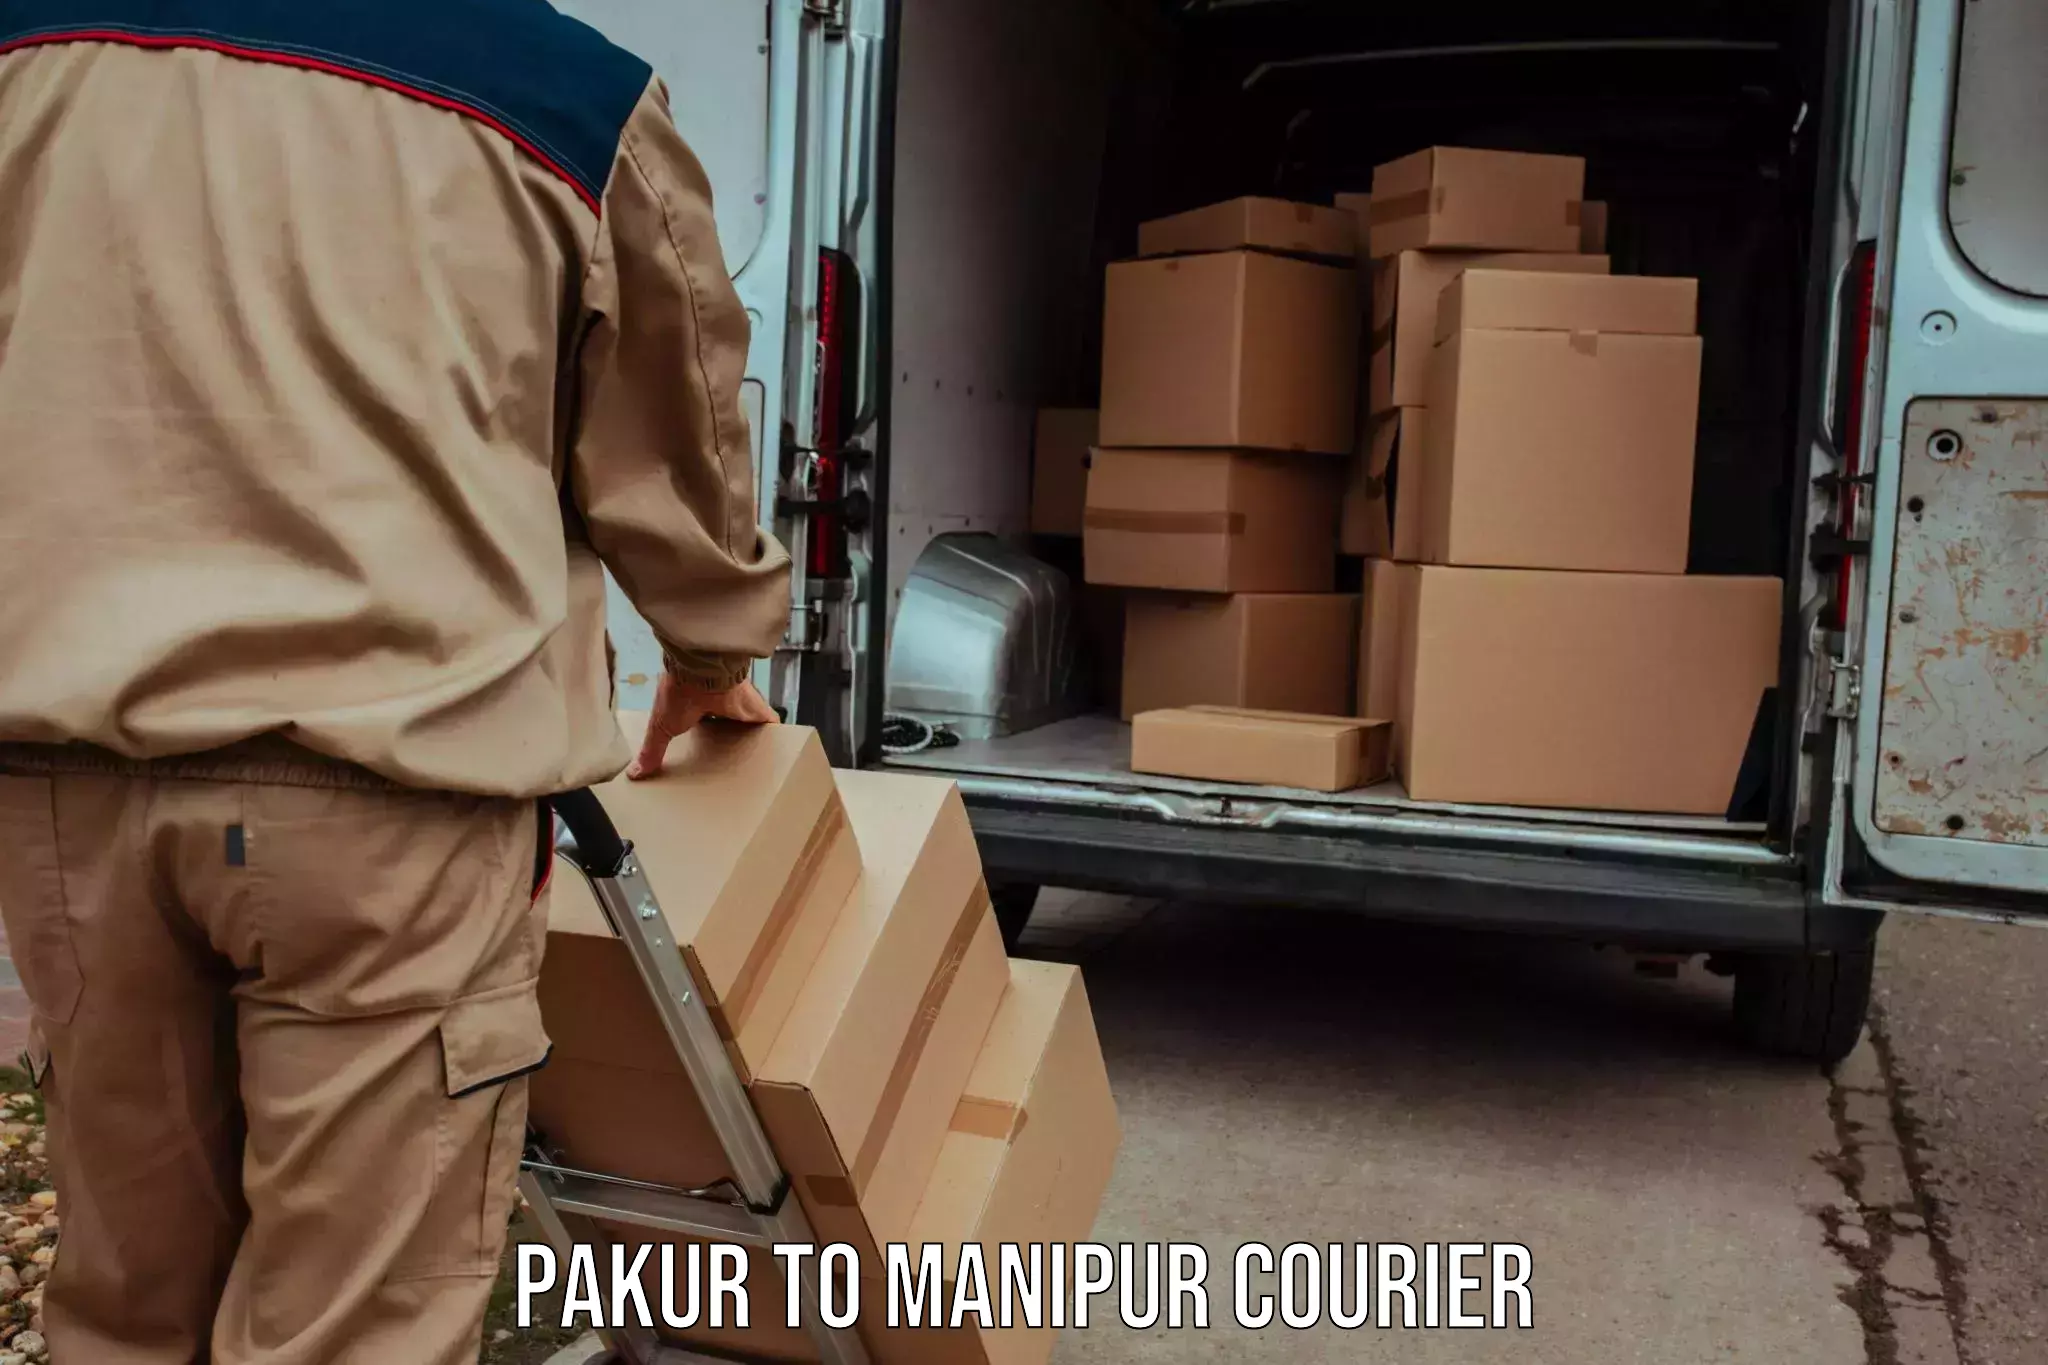 24-hour courier service Pakur to Ukhrul